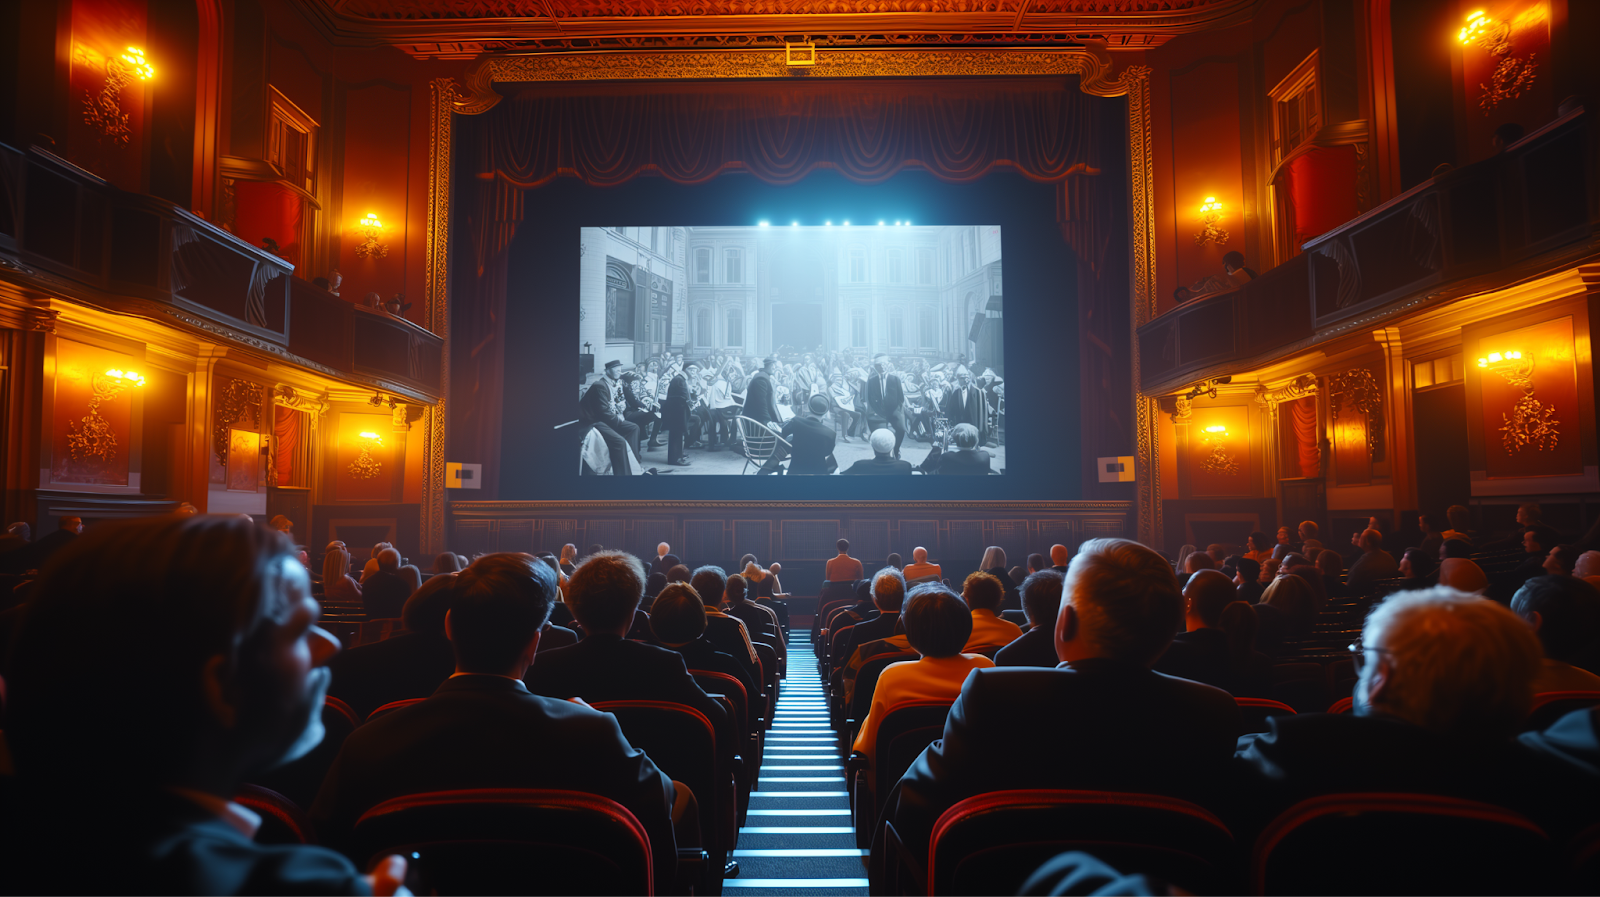 Silent movie screening accompanied by a live orchestra in Babylon Cinema.